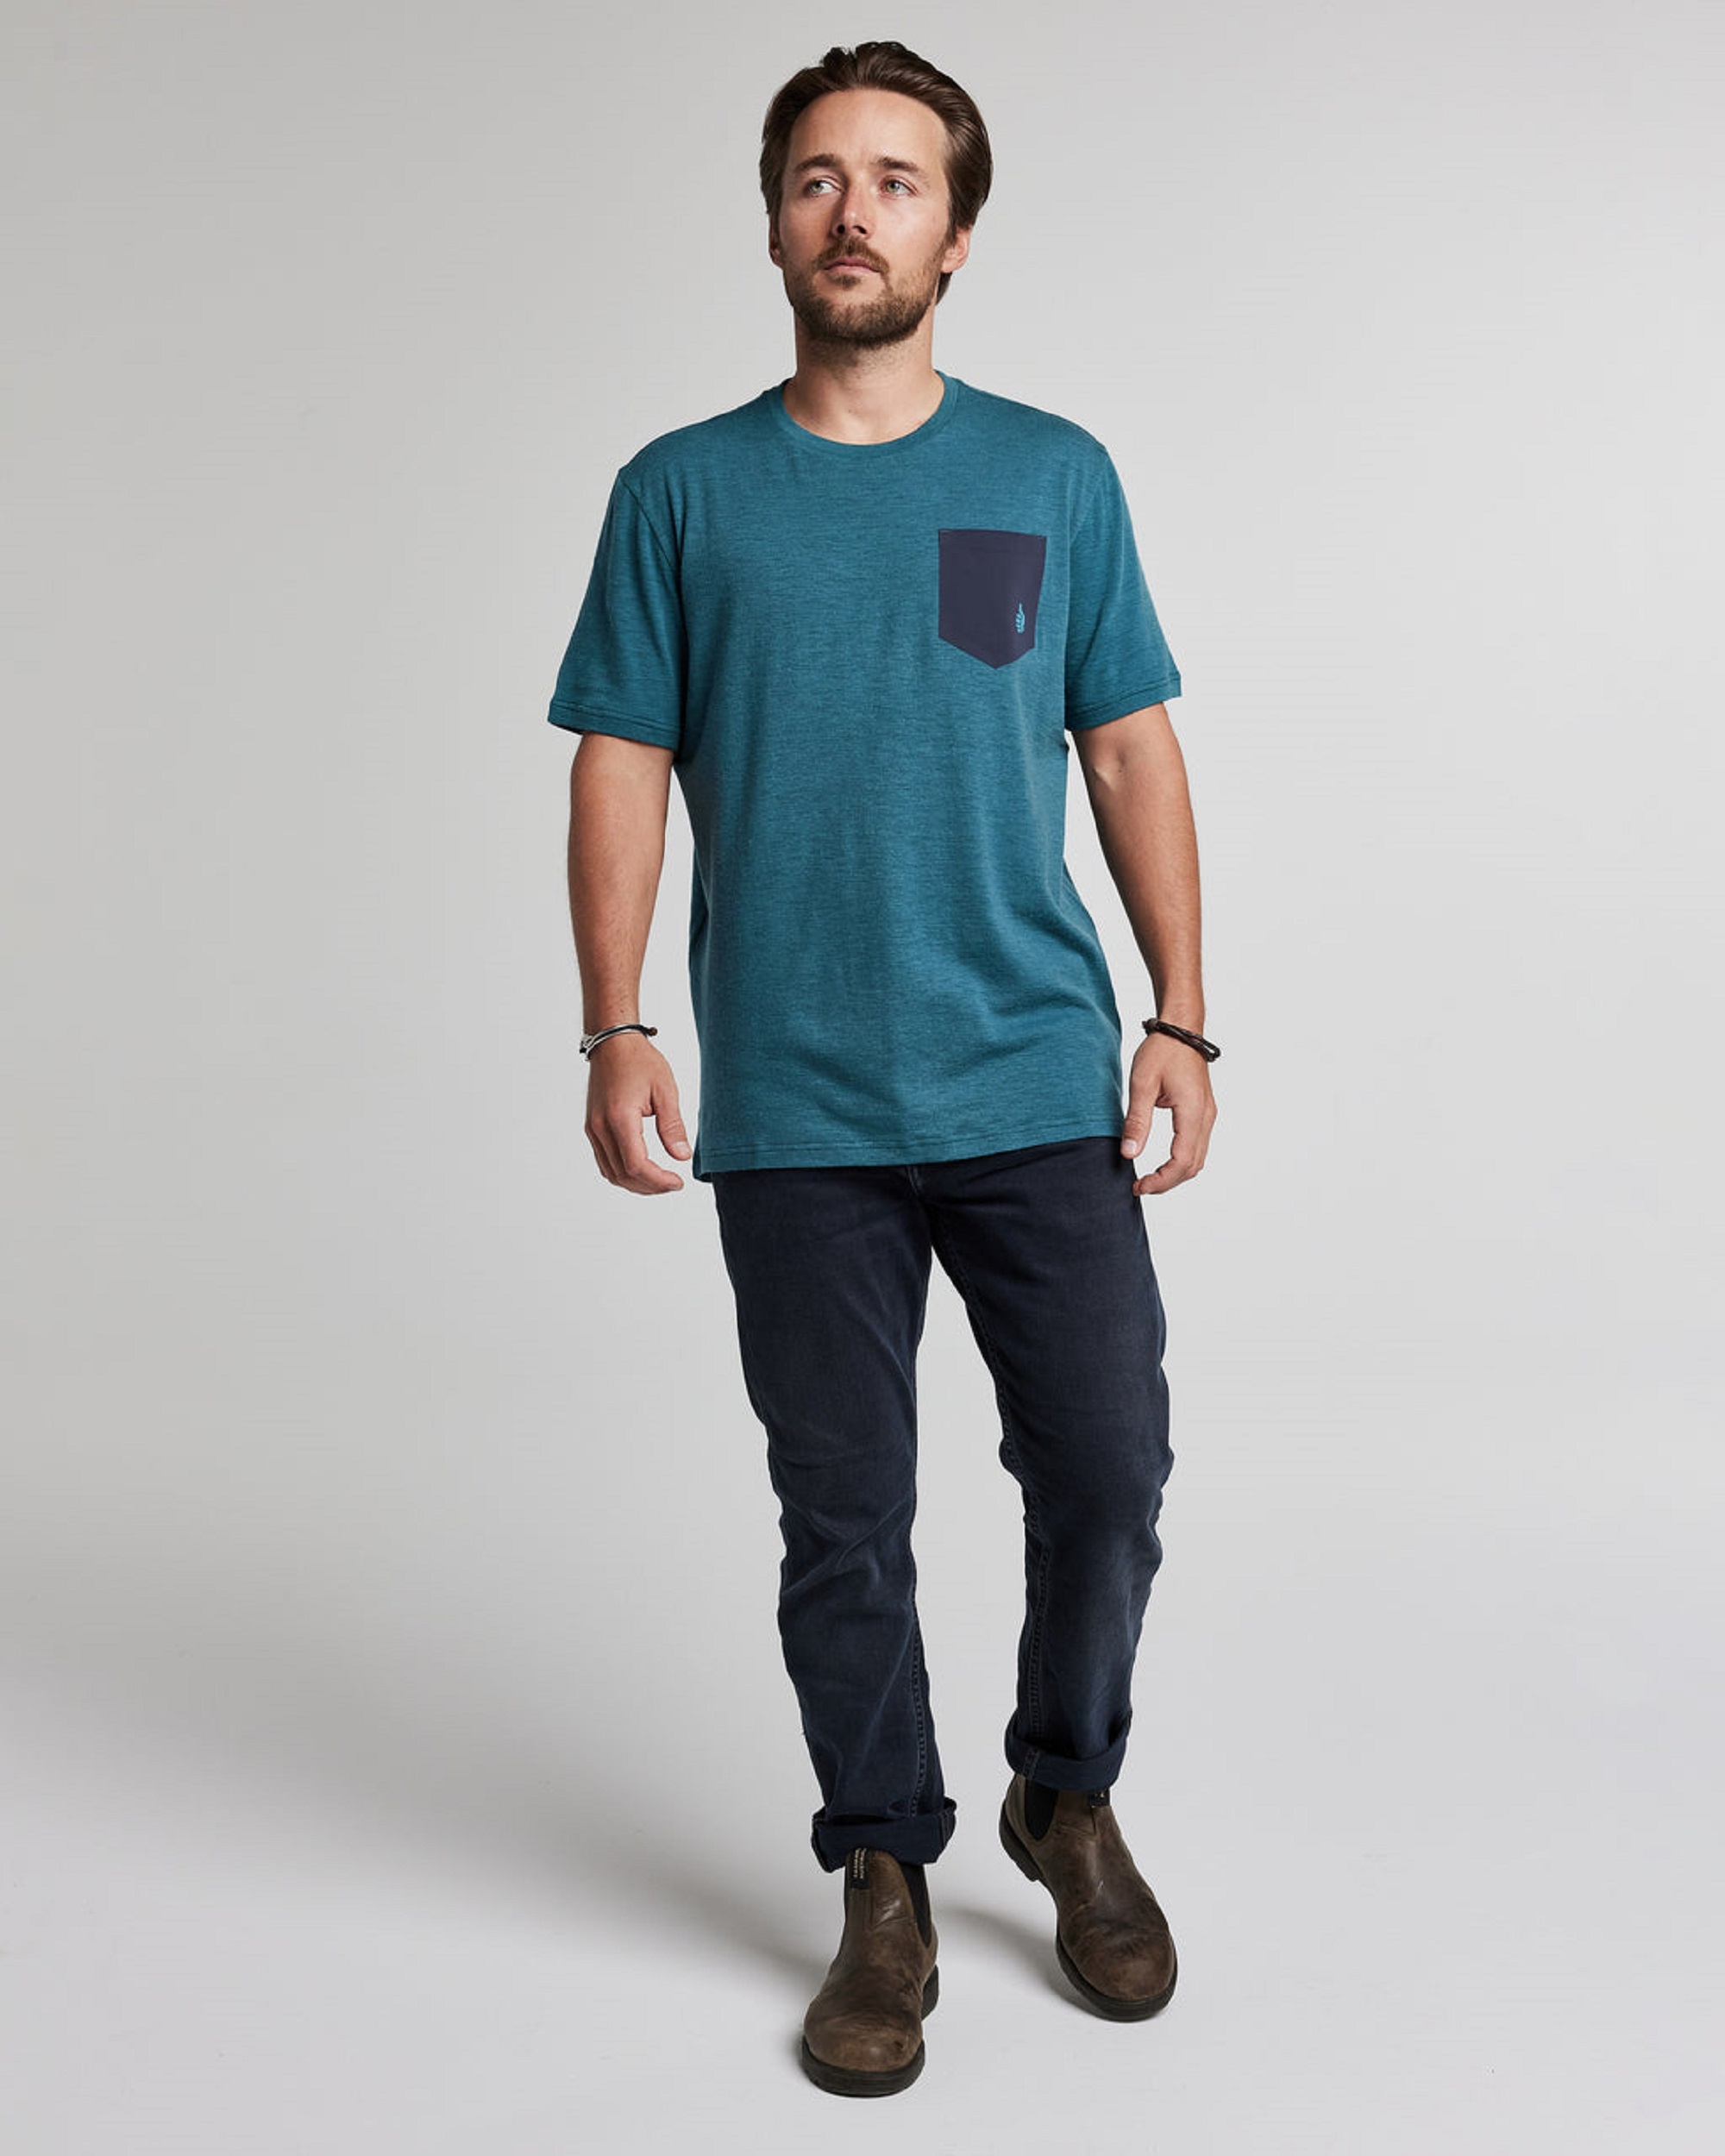 Man wearing a blue TREW t-shirt and jeans